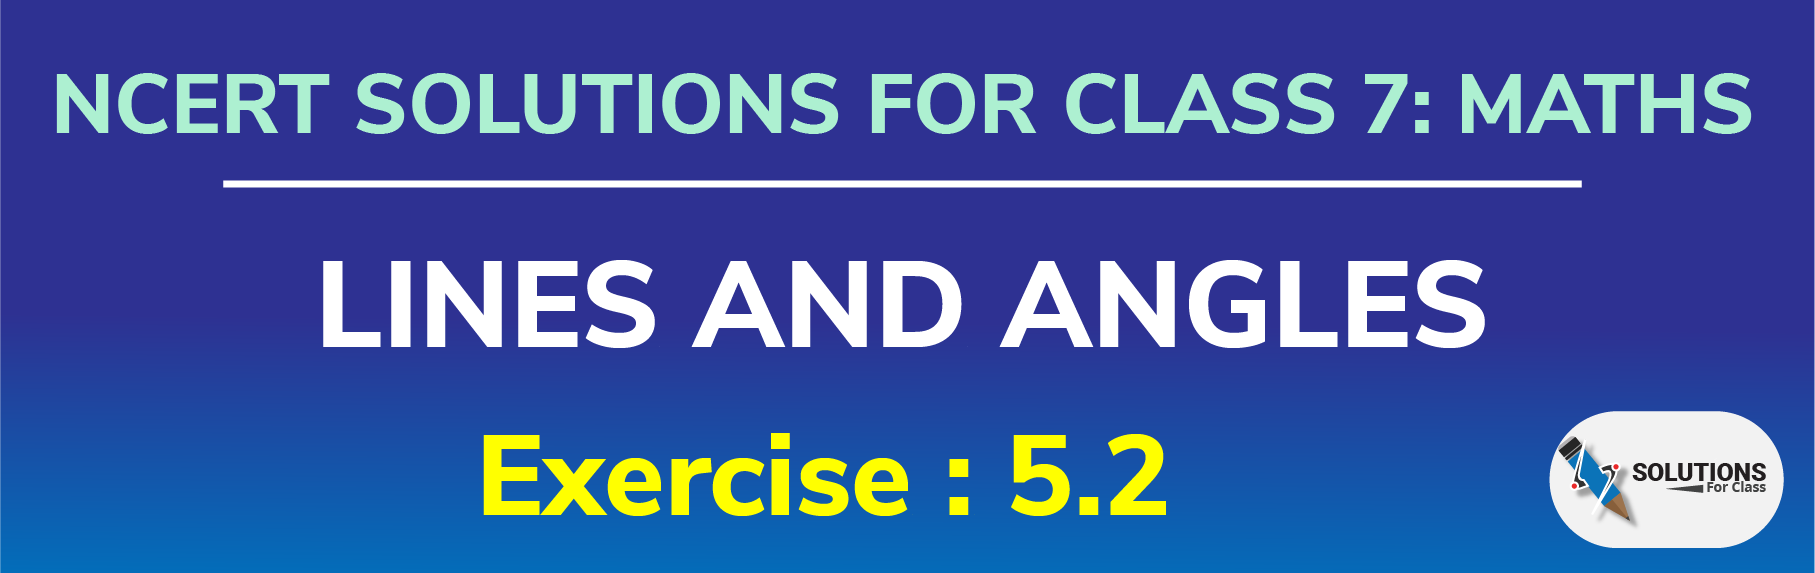 NCERT Solutions for Class 7, Maths, Chapter 5, Lines and Angles, Exercise 5.2